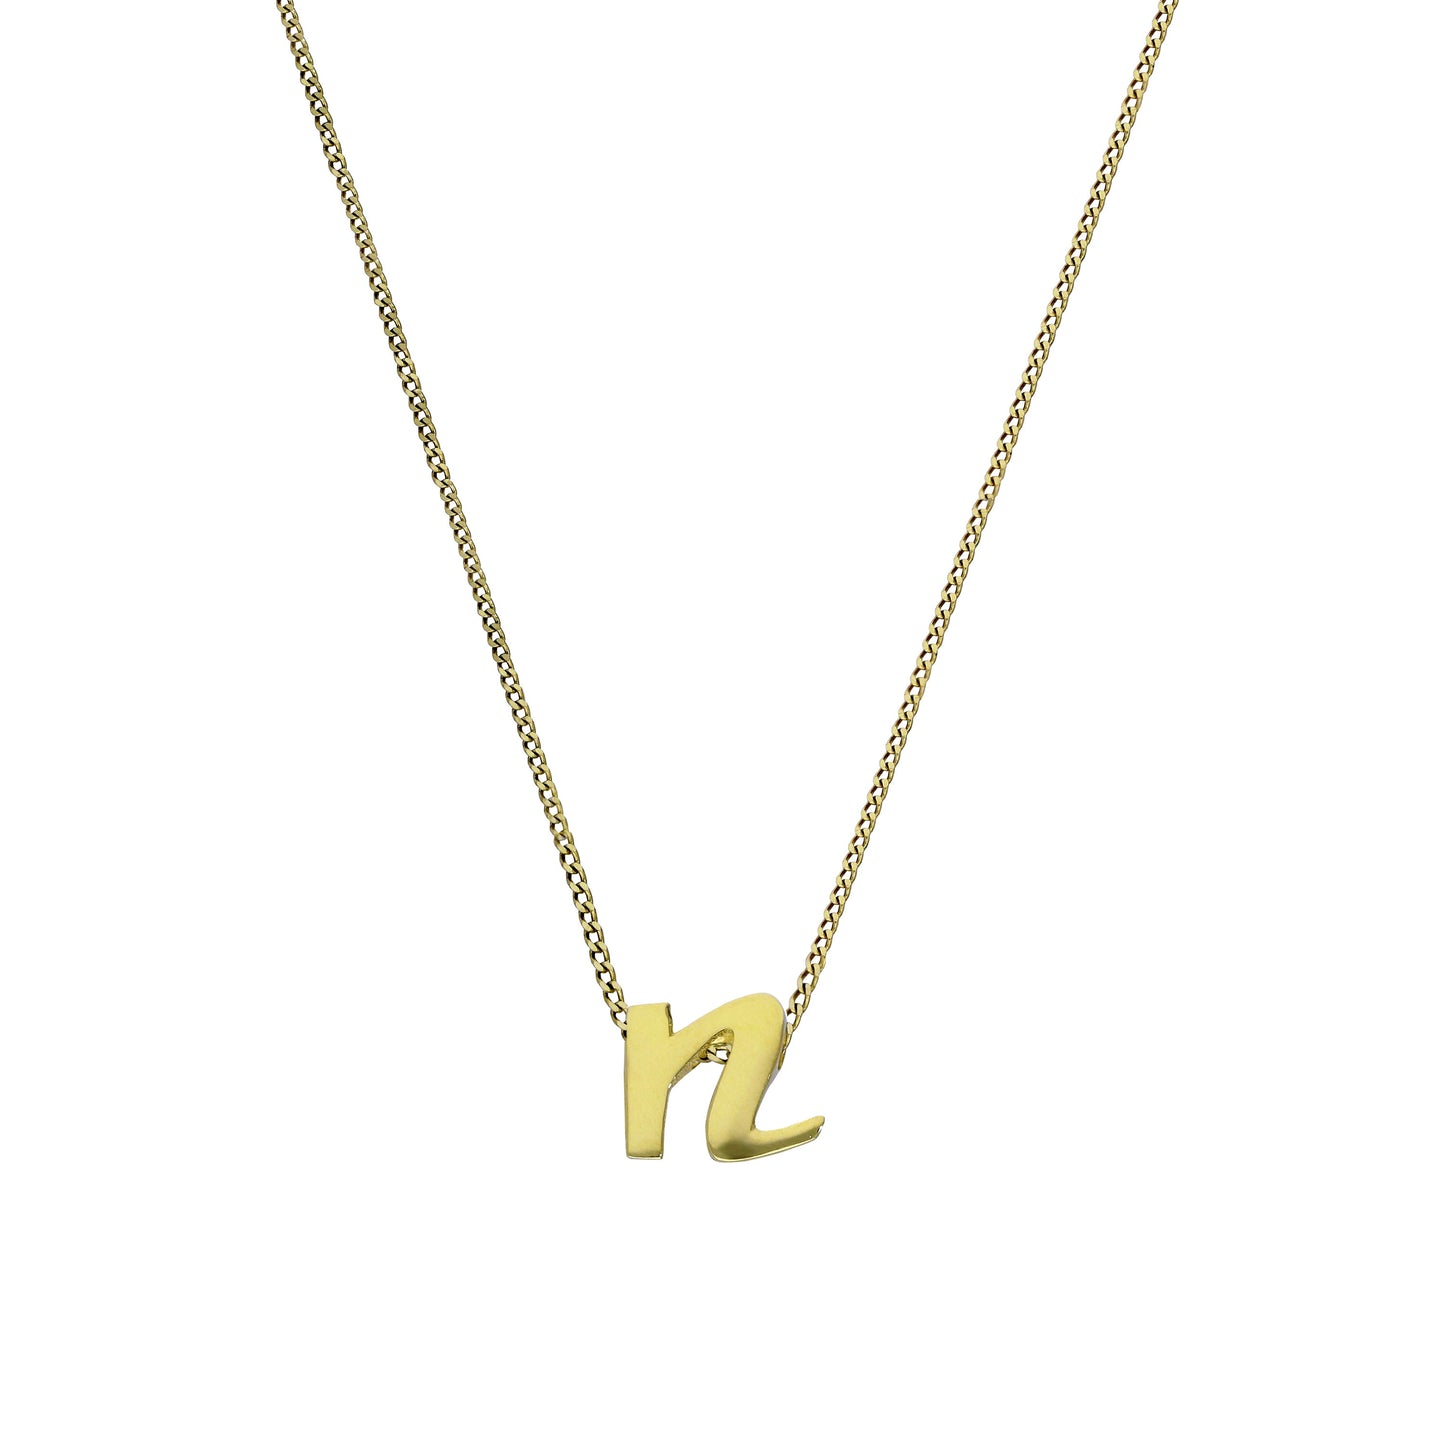 Tiny 9ct Gold Alphabet Letter N Pendant Necklace 16 - 20 Inches